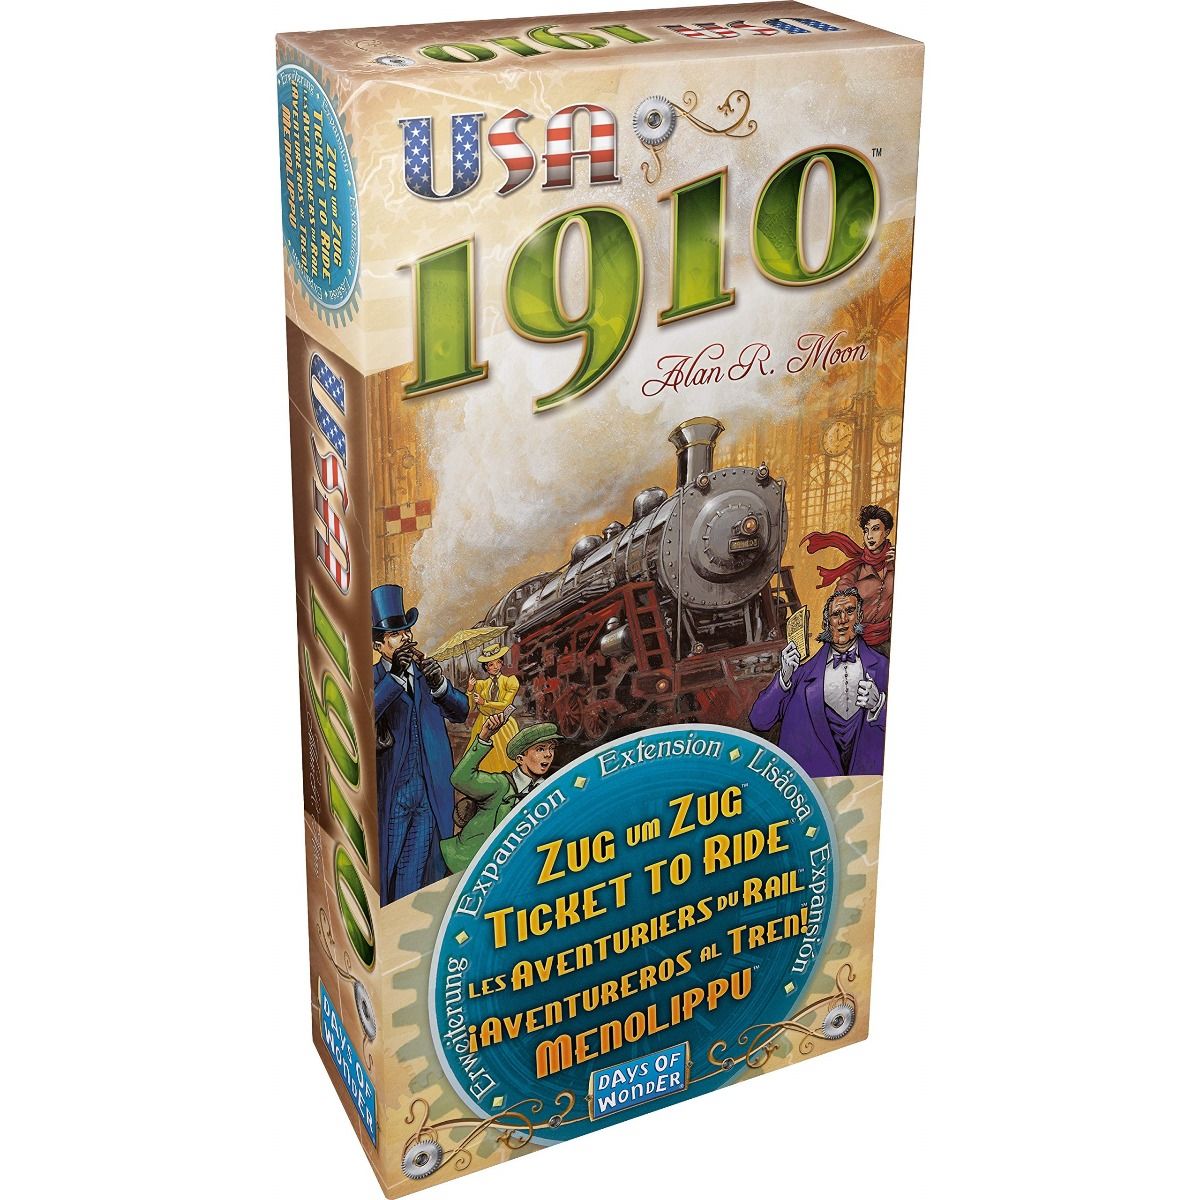 Ticket to Ride USA 1910